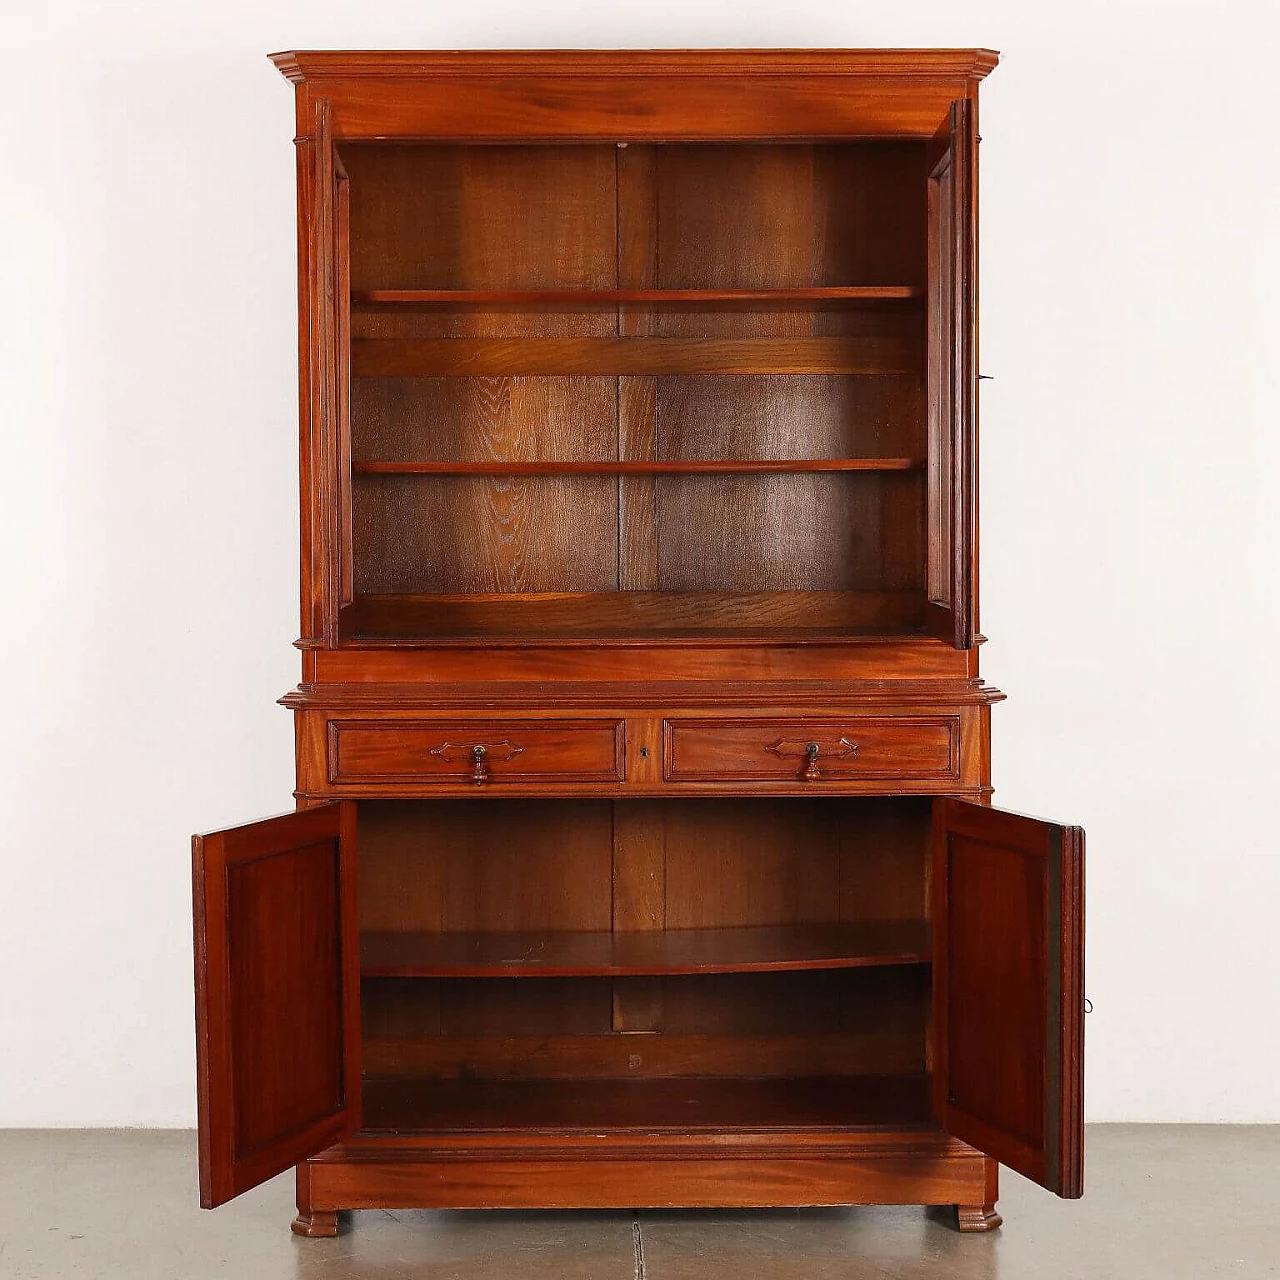 Mahogany bookcase with two glass doors and drawers, late 19th century 3